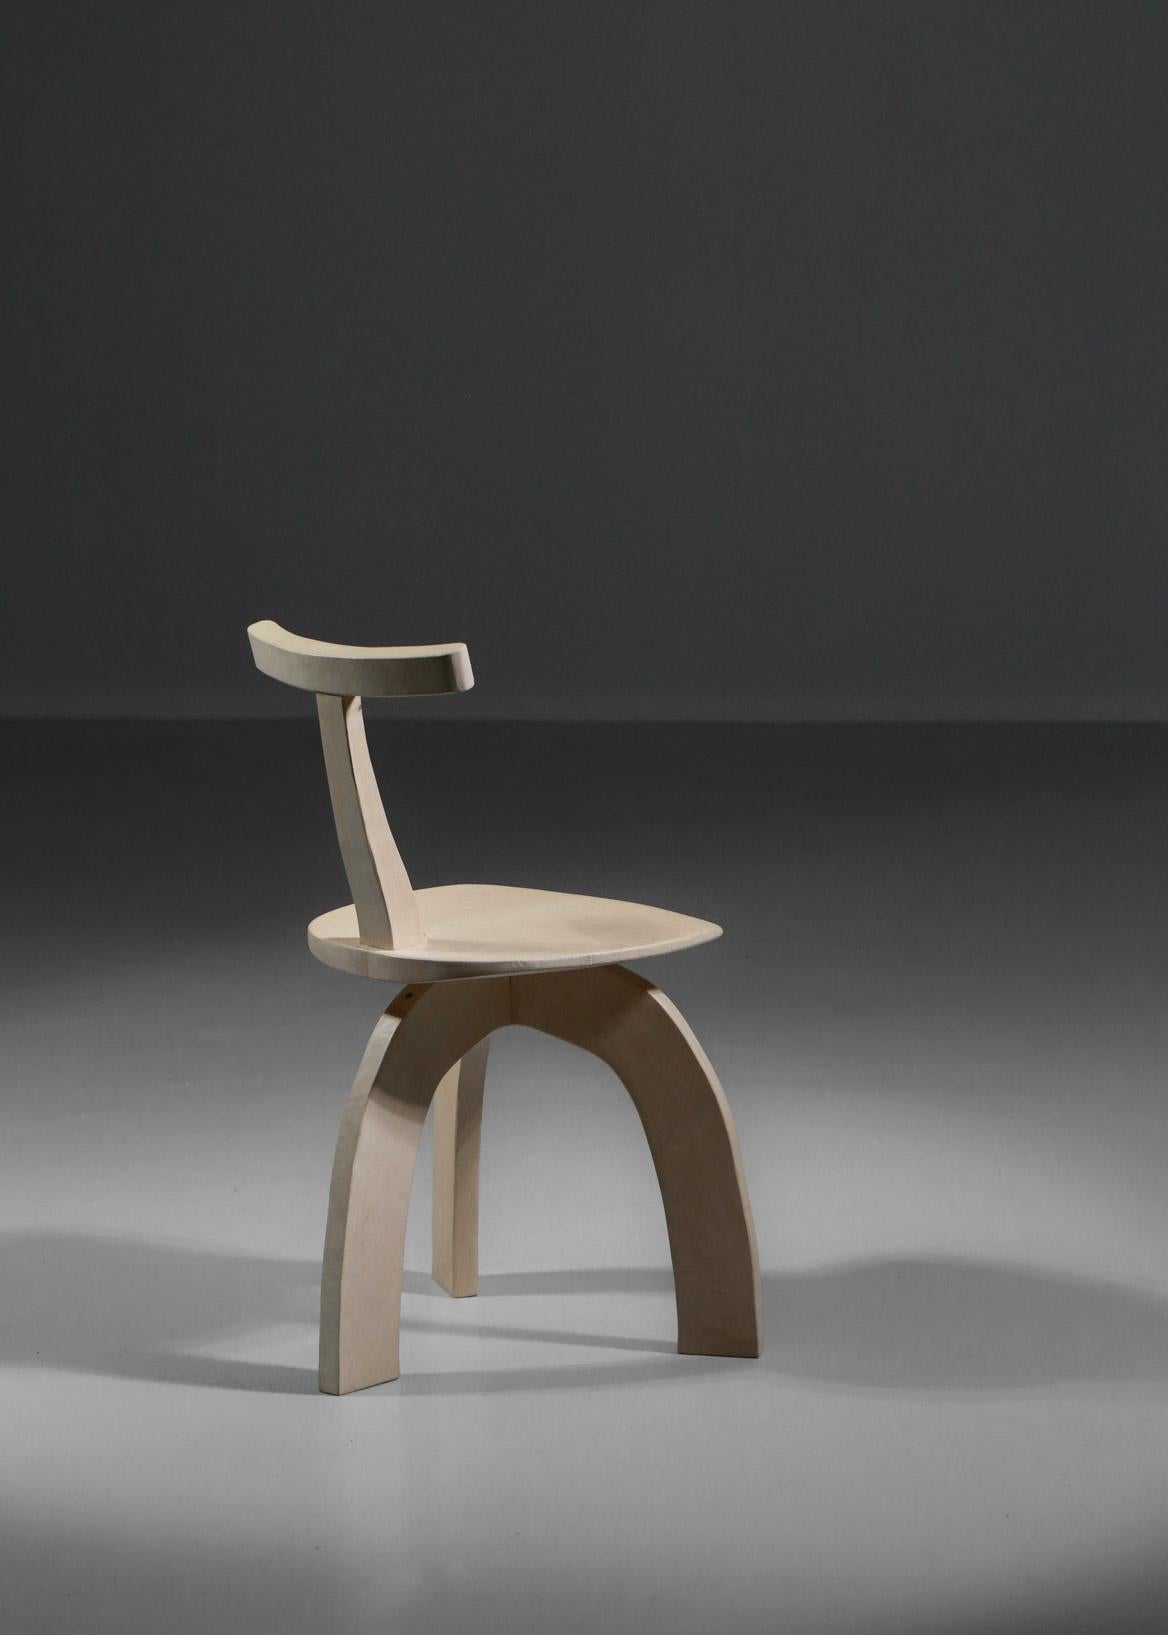 Contemporary Artisanal Modern 80/20 Oak or Sycamore Chair Created by Vincent Vincent For Sale